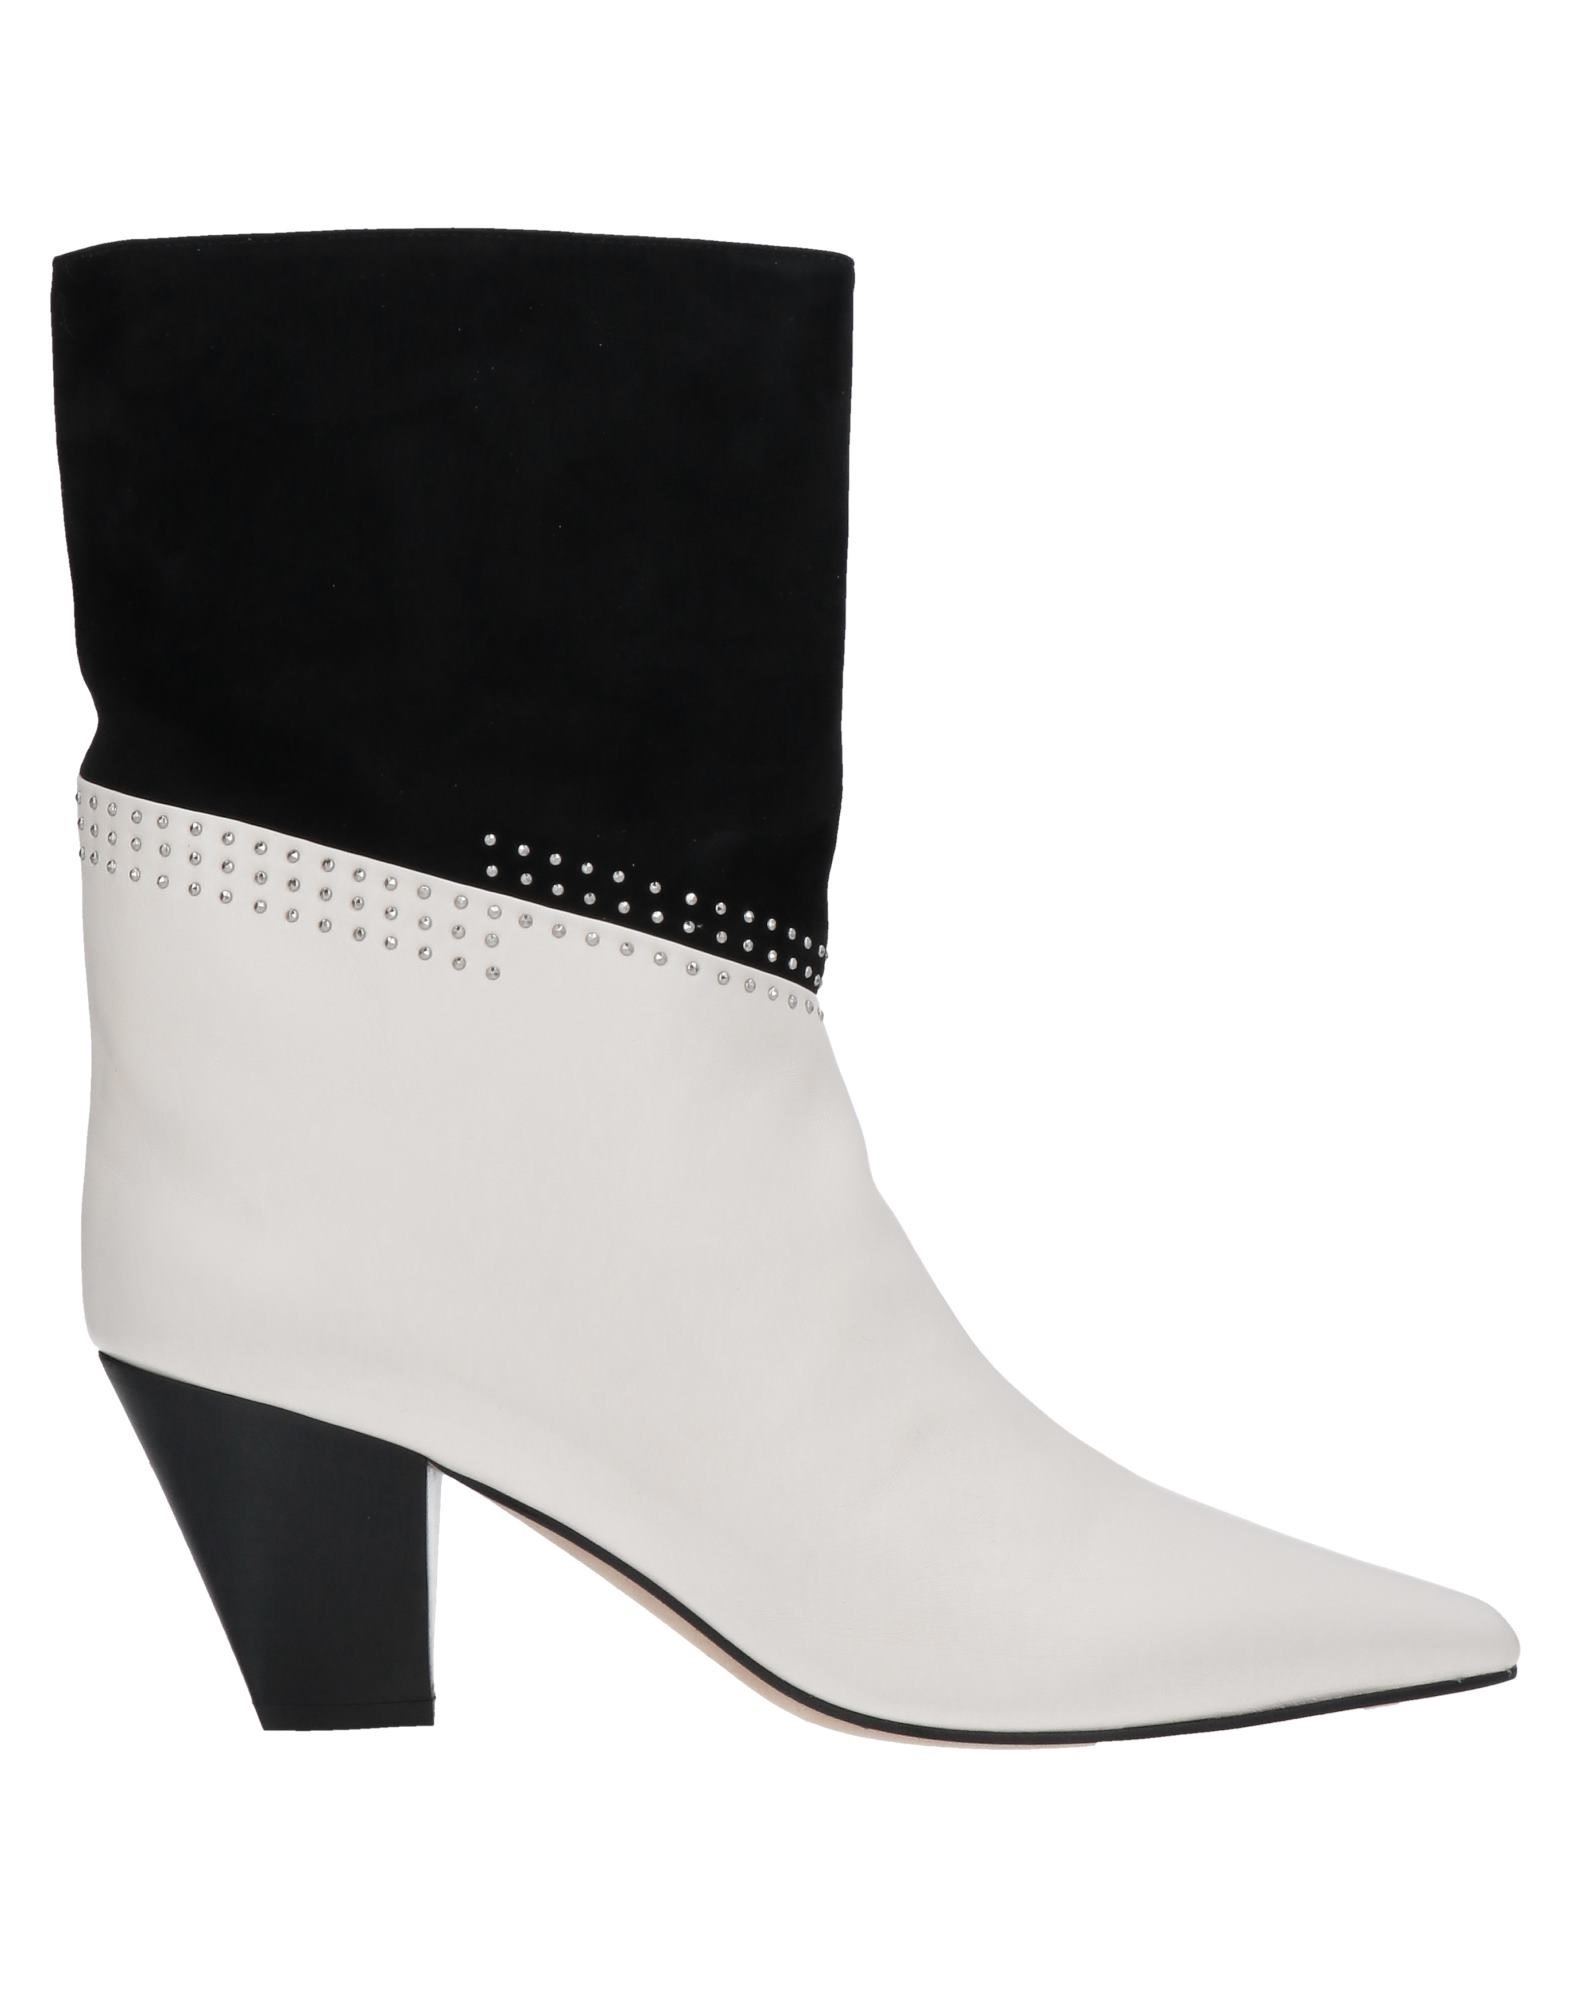 Shop Jimmy Choo Woman Ankle Boots White Size 6 Soft Leather